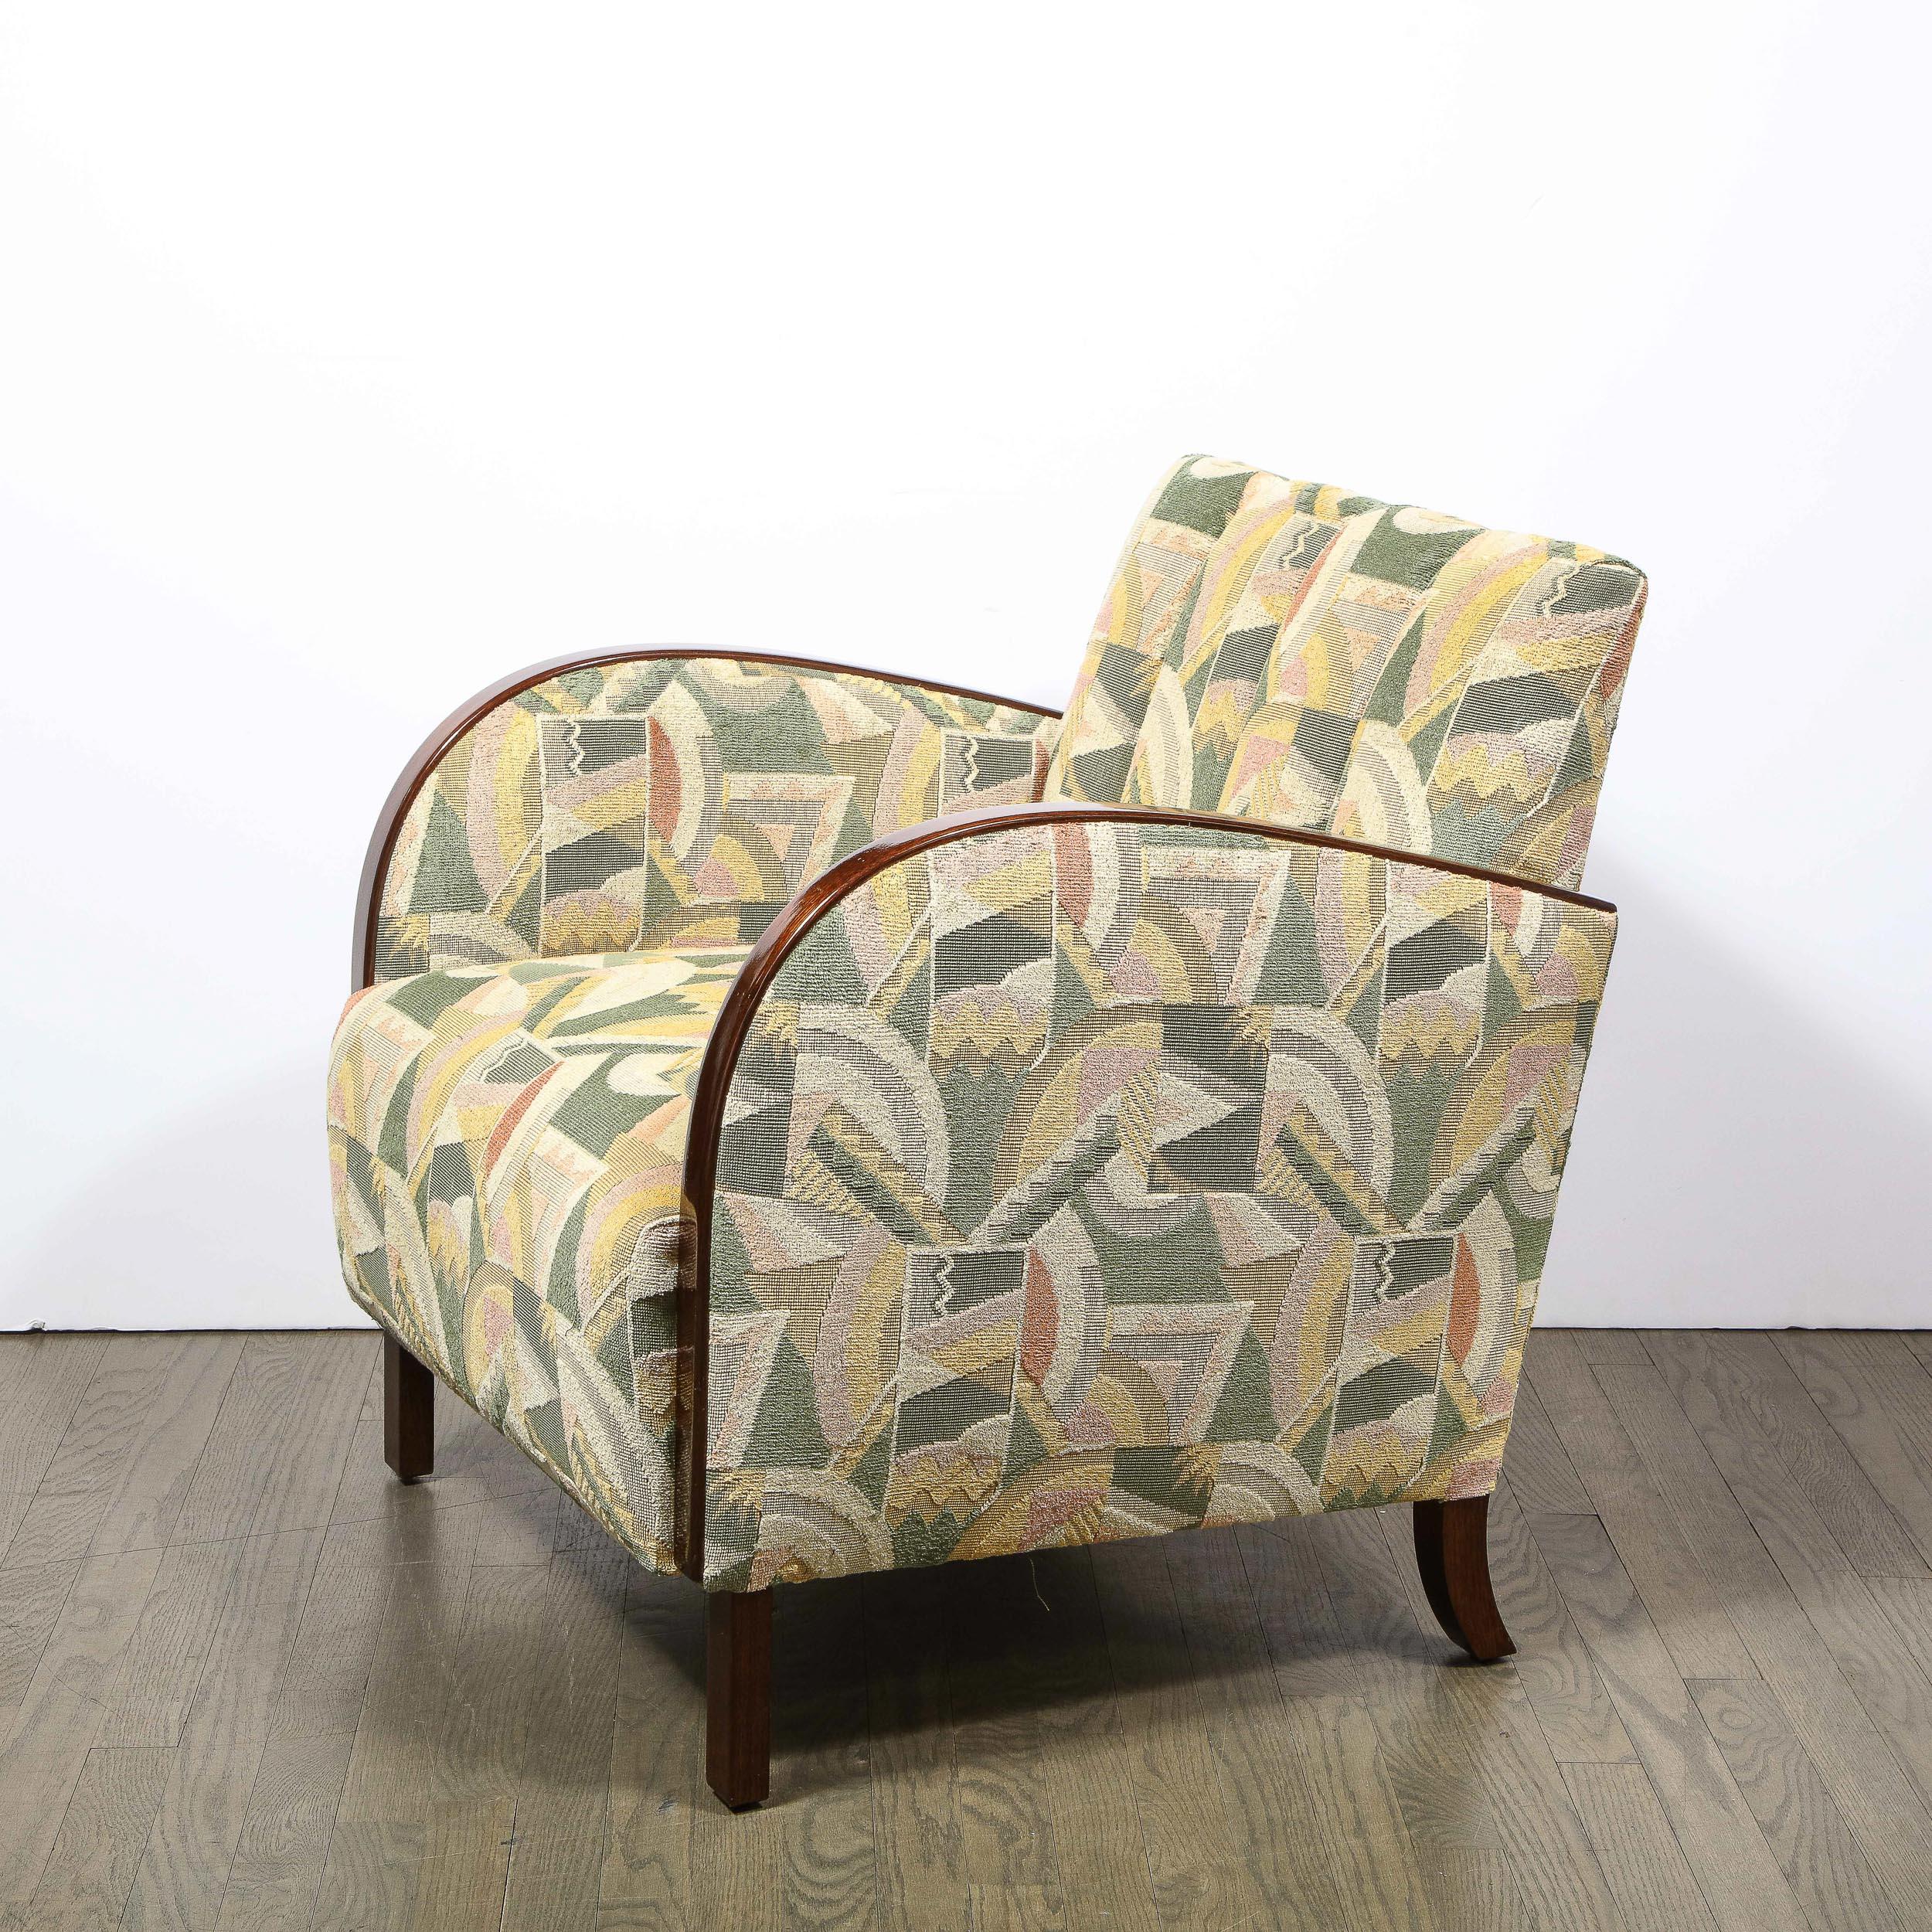 French Pair of Art Deco Streamlined Walnut Club Chairs in Cubist Clarence House Fabric For Sale